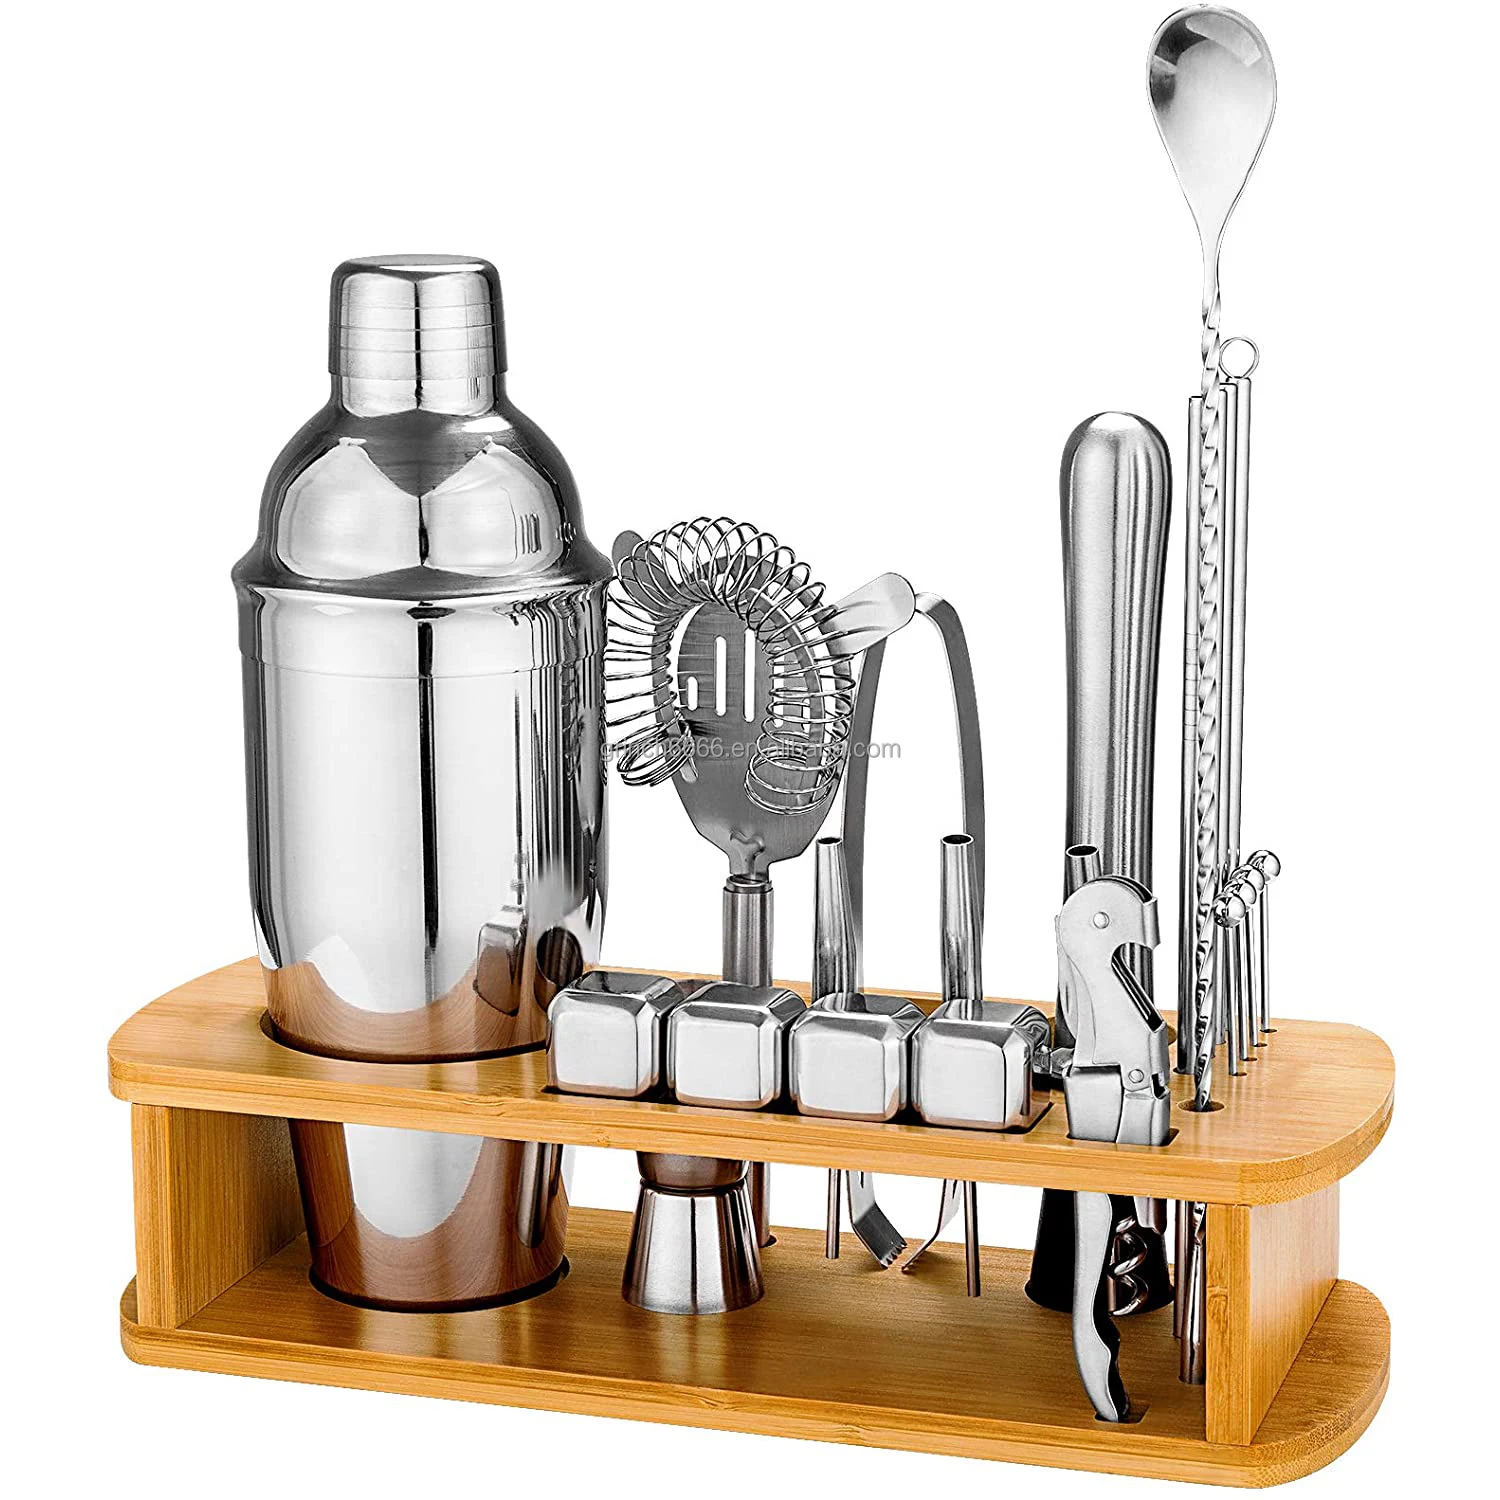 Stylish Barware Set With Stand Bartender Gifts Cocktail Shaker Set Bar Shaker Gifts For Him Cocktail Kit Top Quality Bartender Kit